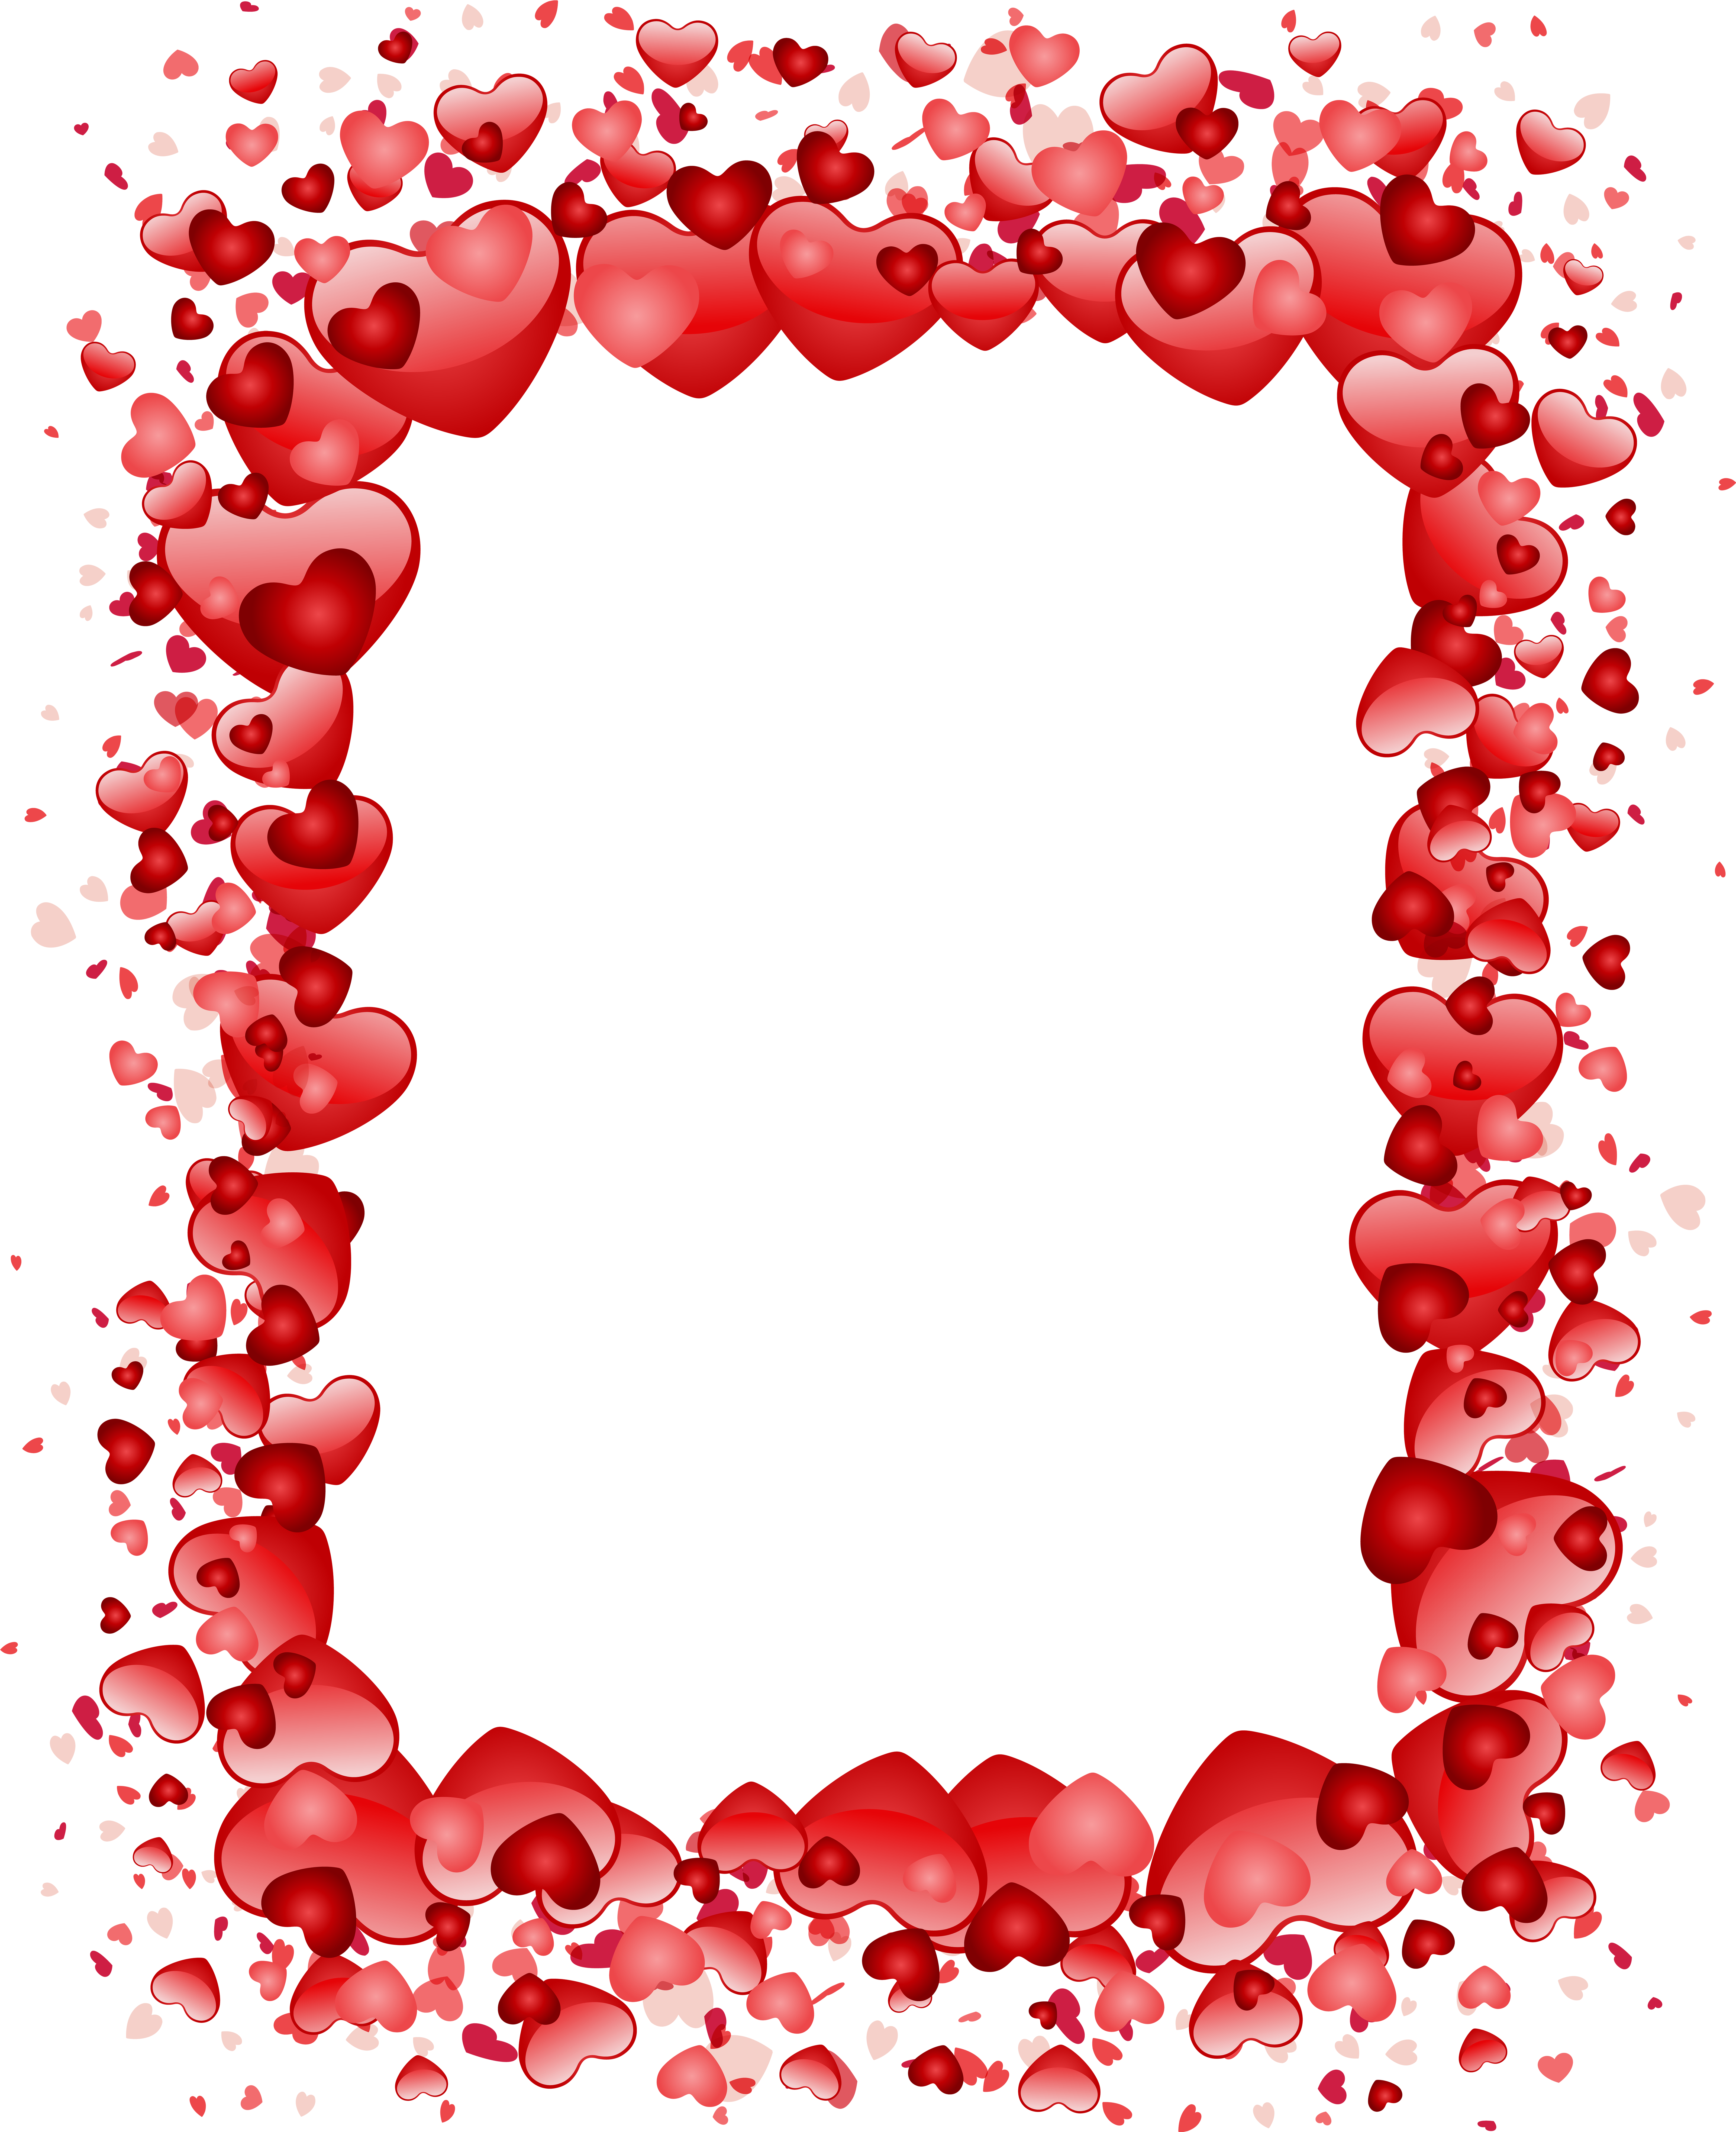 Valentine's Day Hearts Border Transparent Png Clip - Valentine's Day Hearts Border Transparent Png Clip (6515x8000)